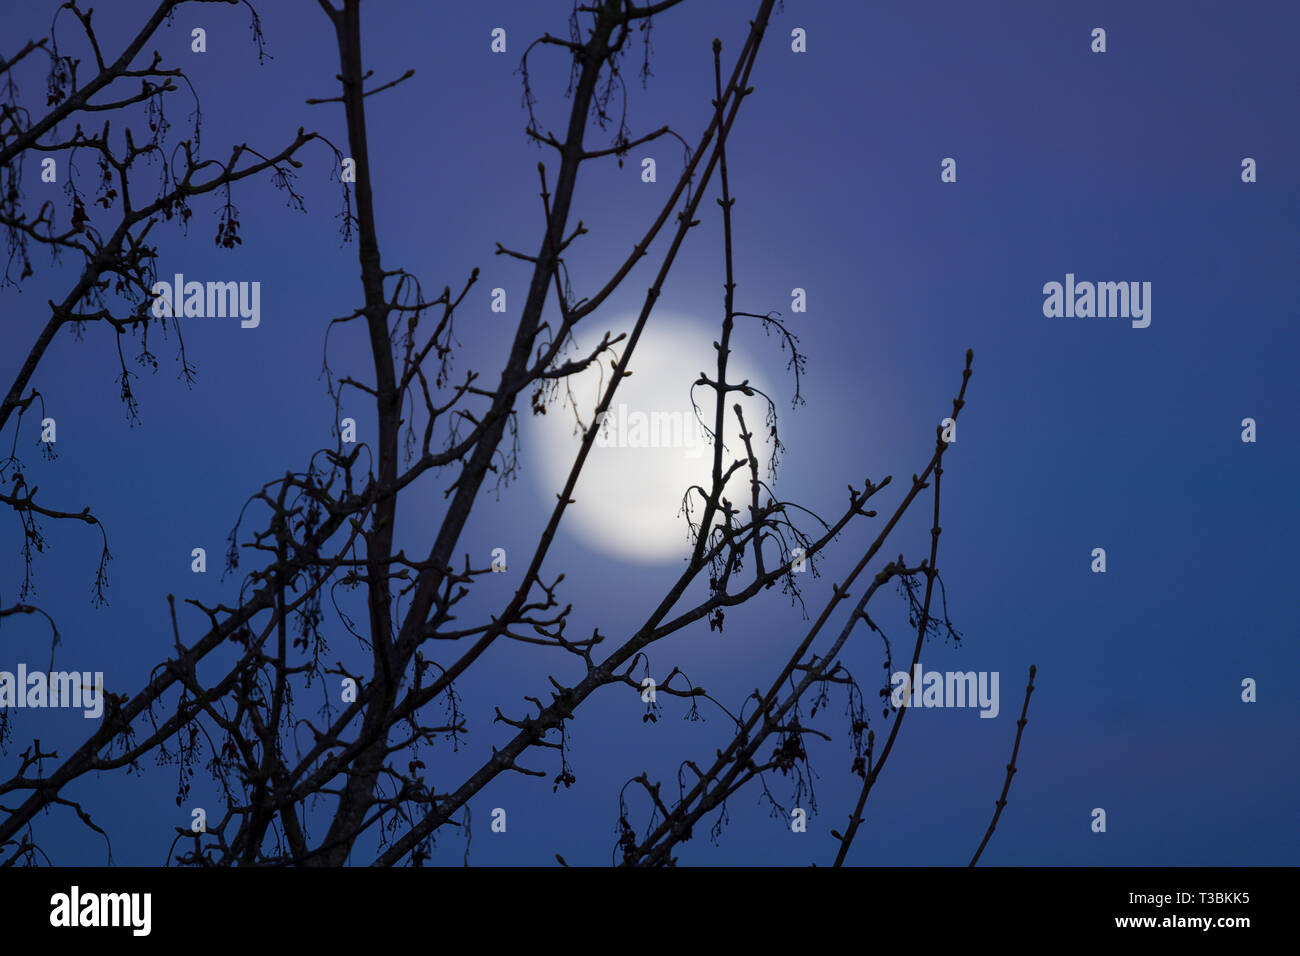 The moon rising behind a tree against a blue sky. Stock Photo